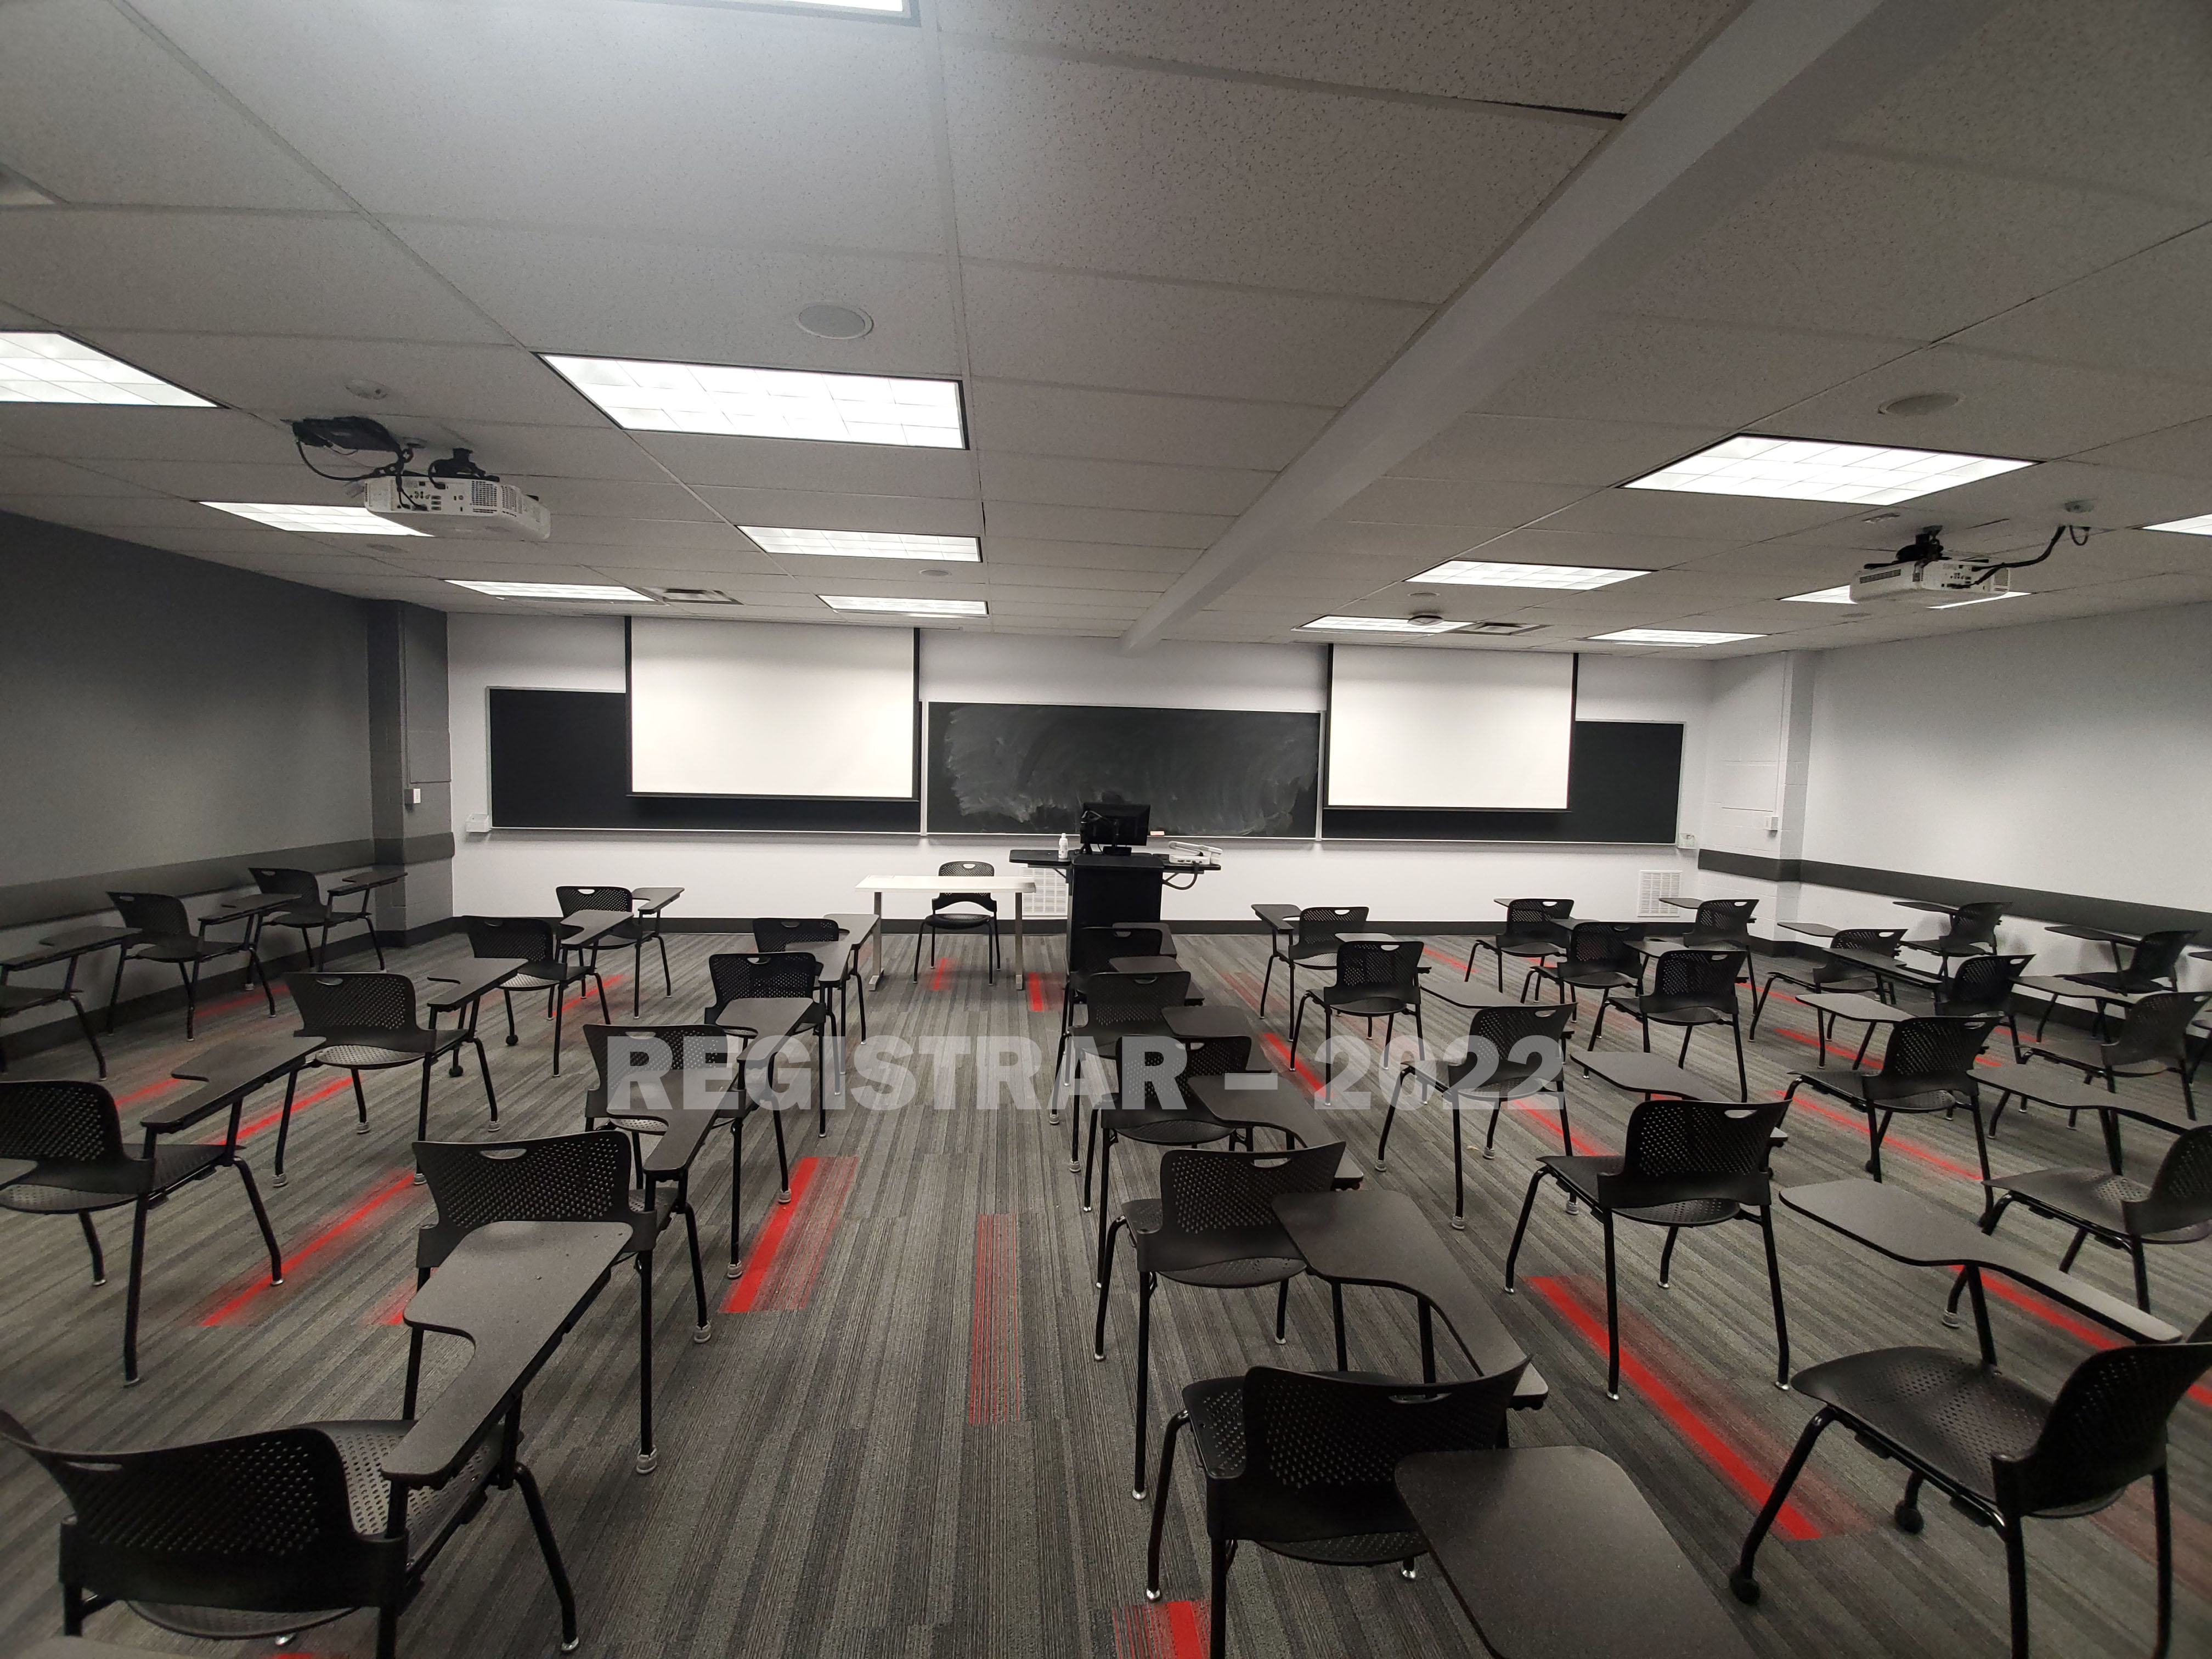 Baker Systems Engineering room 188 ultra wide angle view from the back of the room with projector screen down